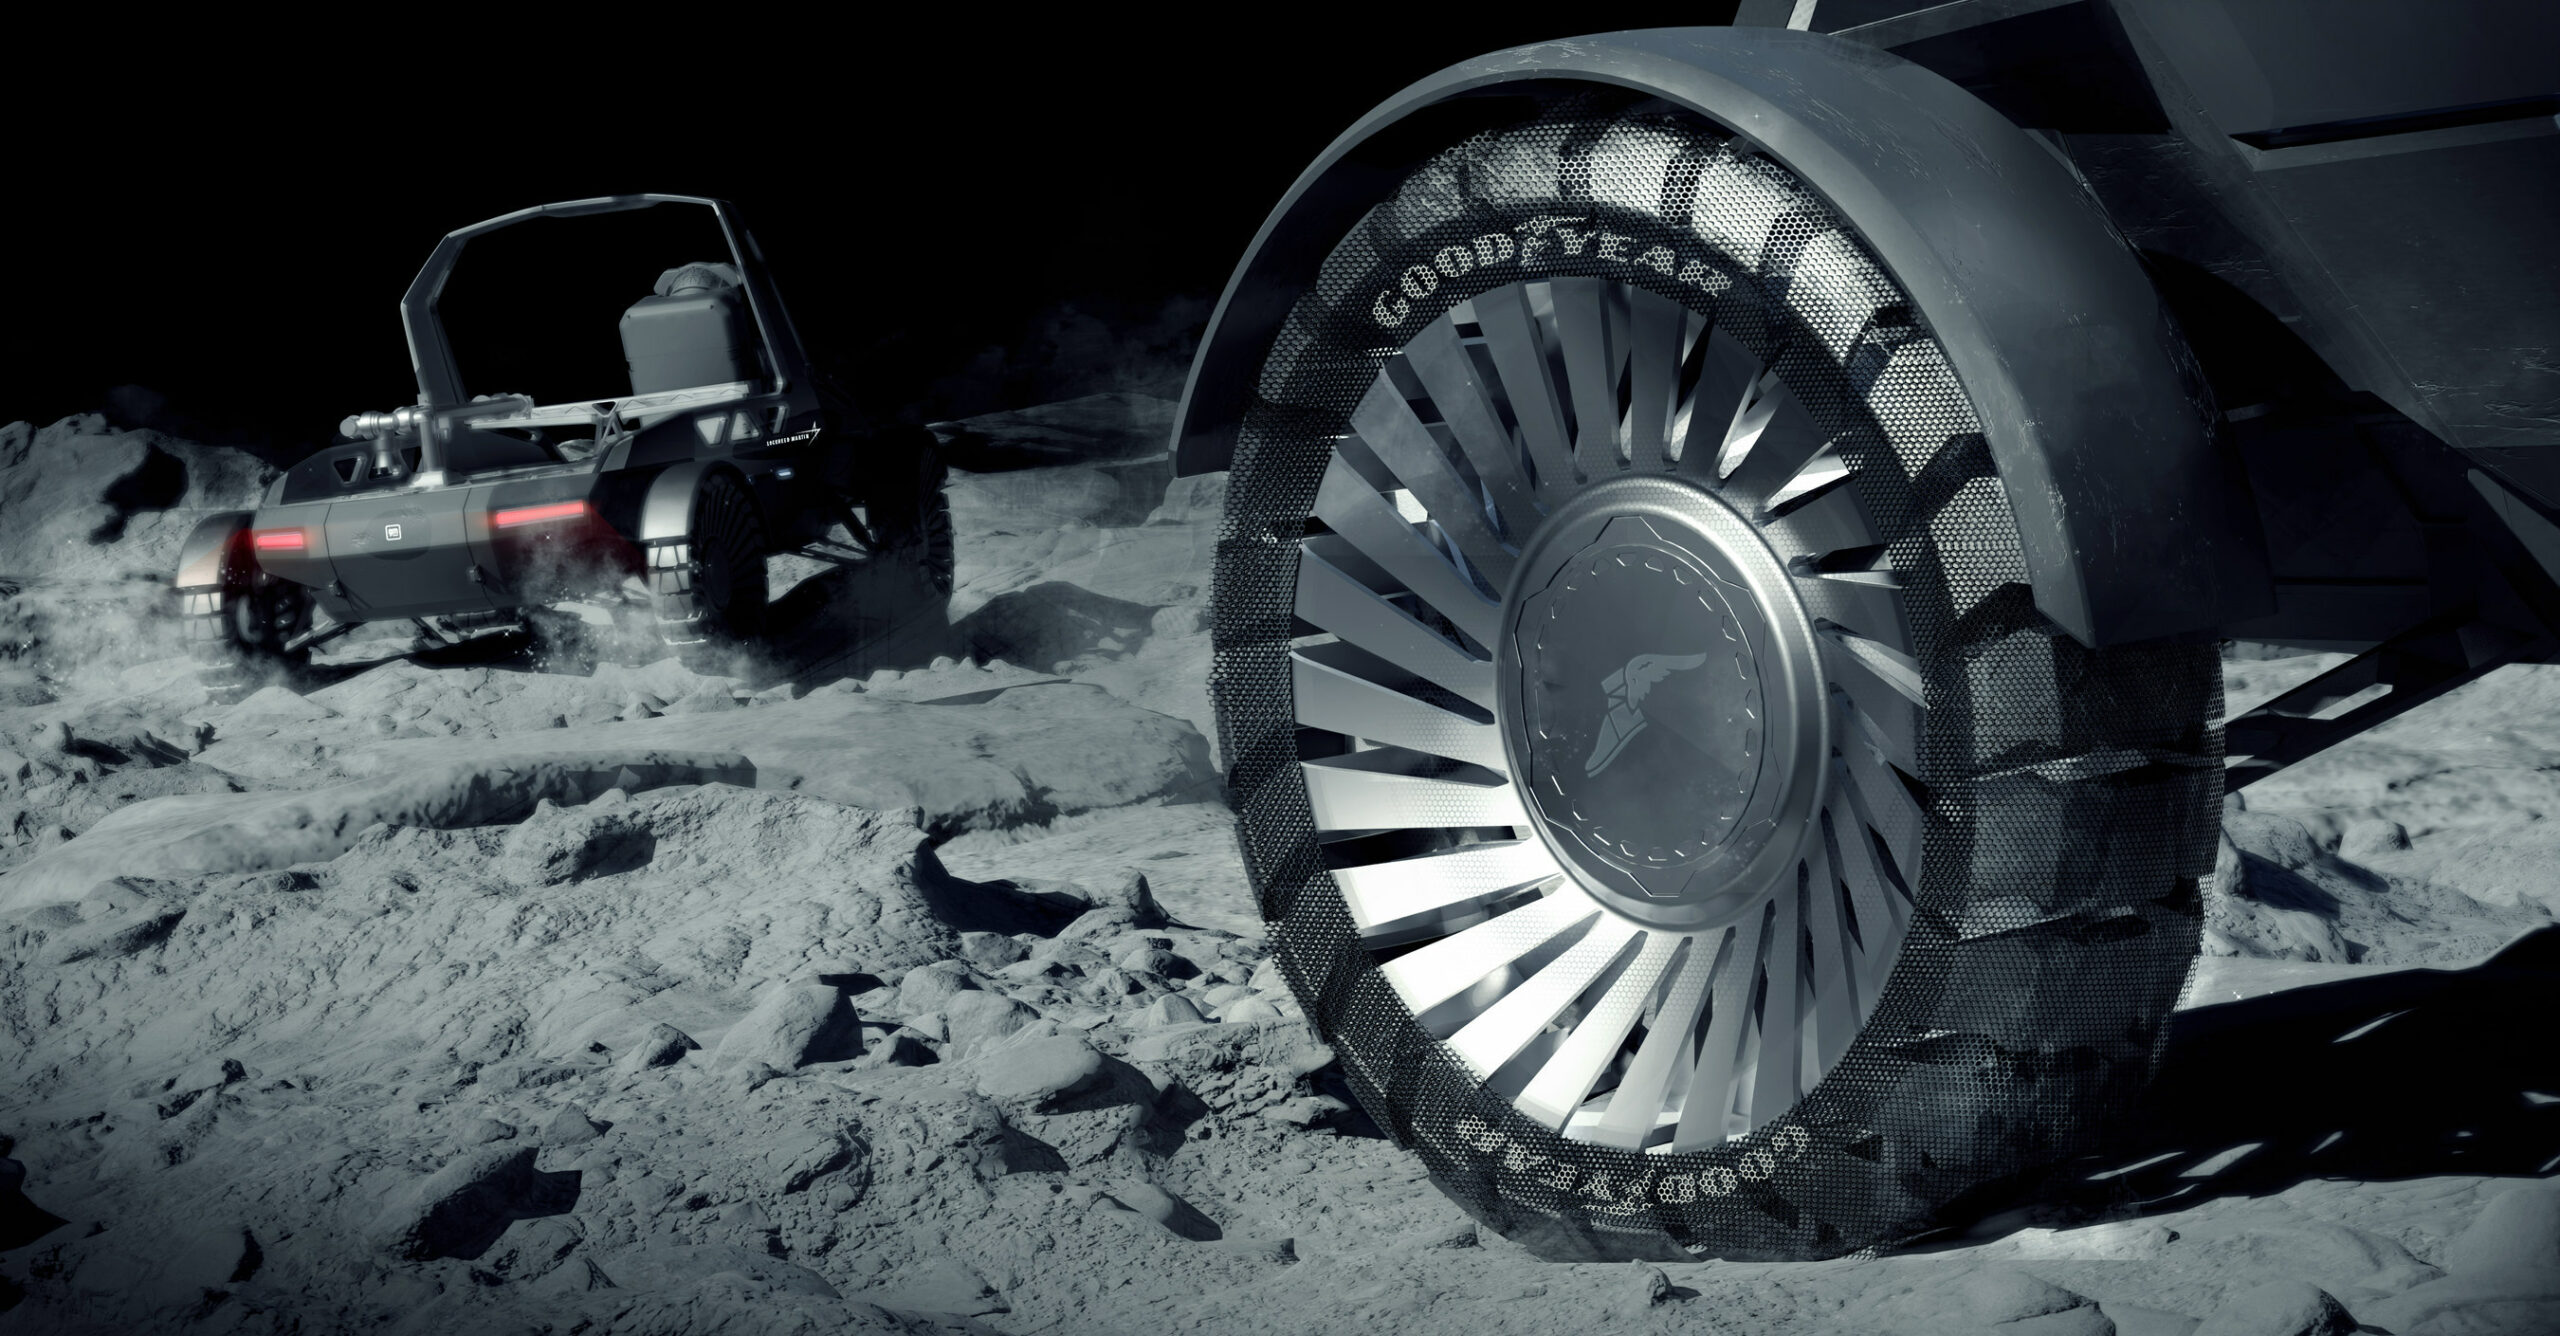 Goodyear joins Lockheed Martin to commercialise Lunar Mobility